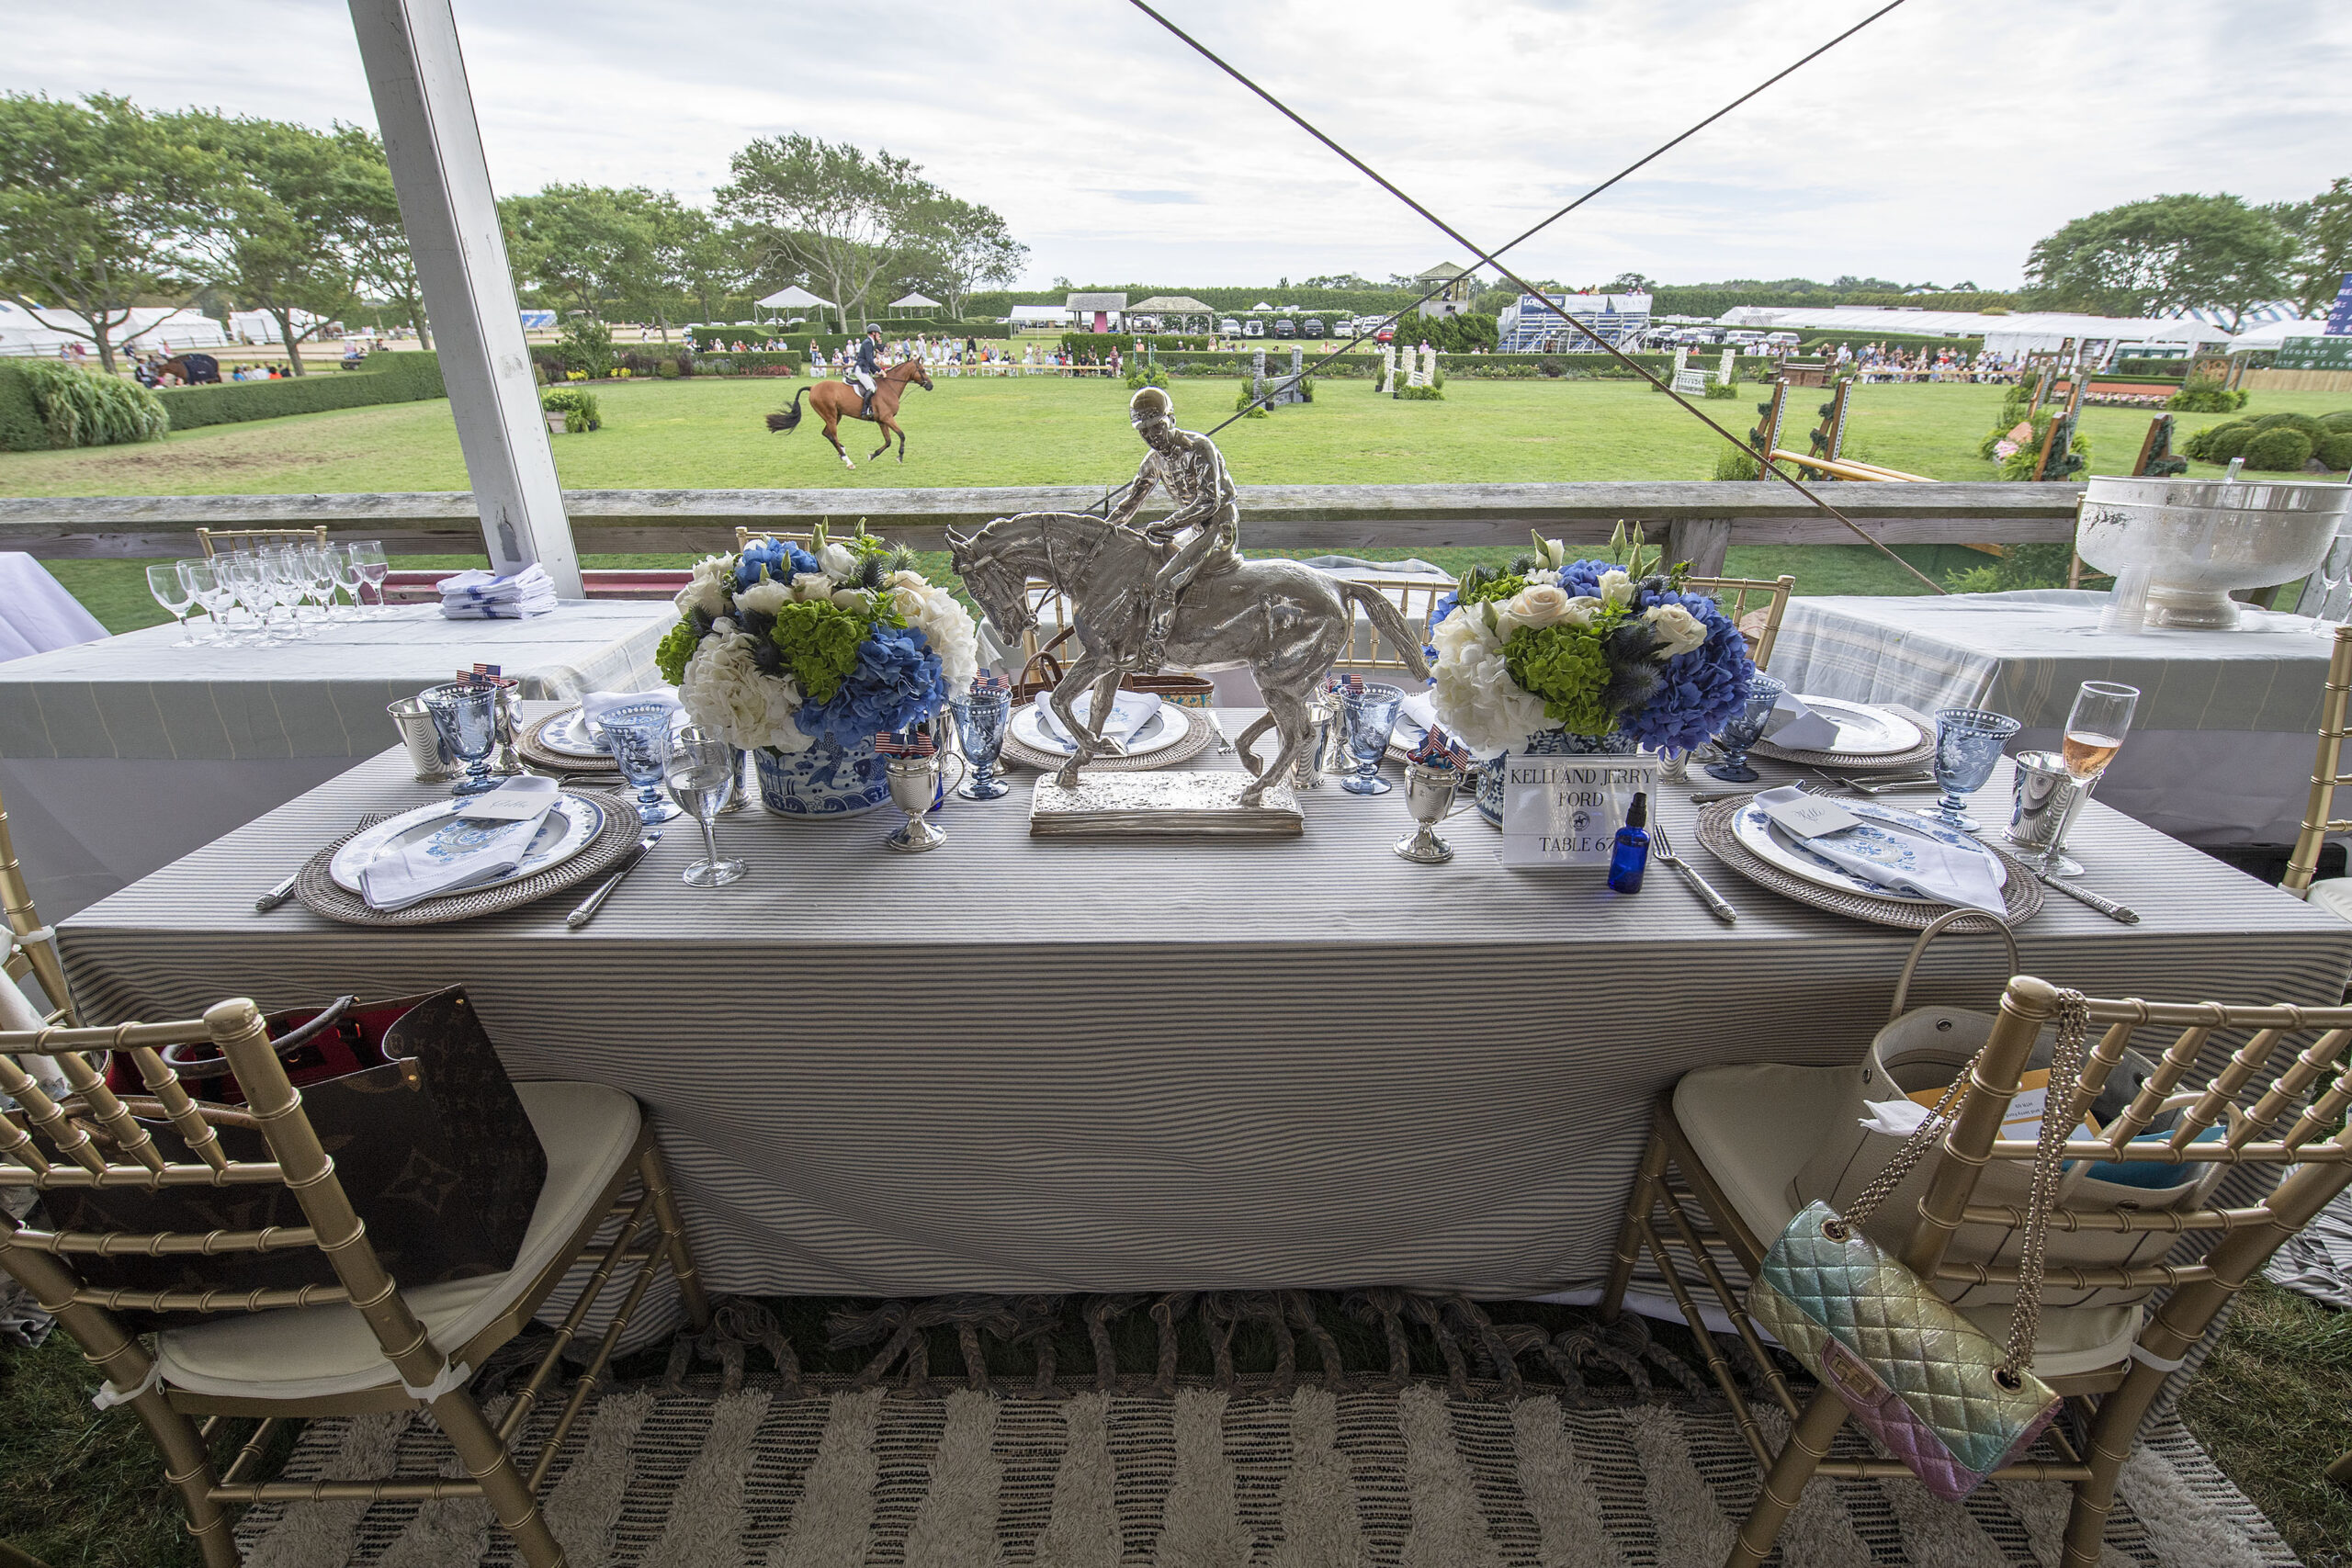 The table setting for the Kelli & Jerry Ford table in the VIP tent at the 2021 Hampton Classic on Grand Prix Sunday, September 5th, 2021